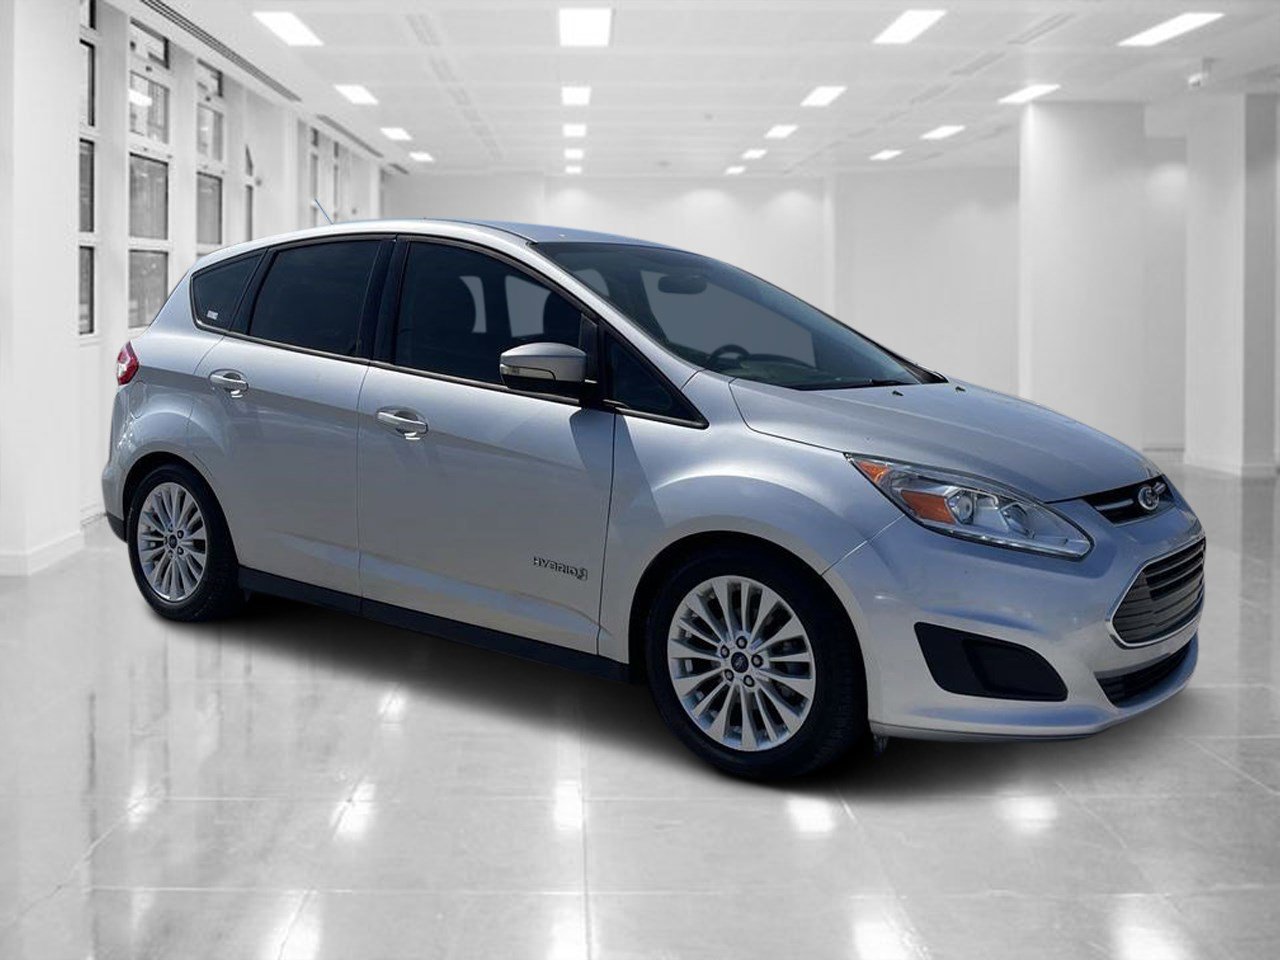 Pre-Owned 2017 Ford C-Max Hybrid SE Hatchback in Longwood #KC23400A |  Greenway Kia North